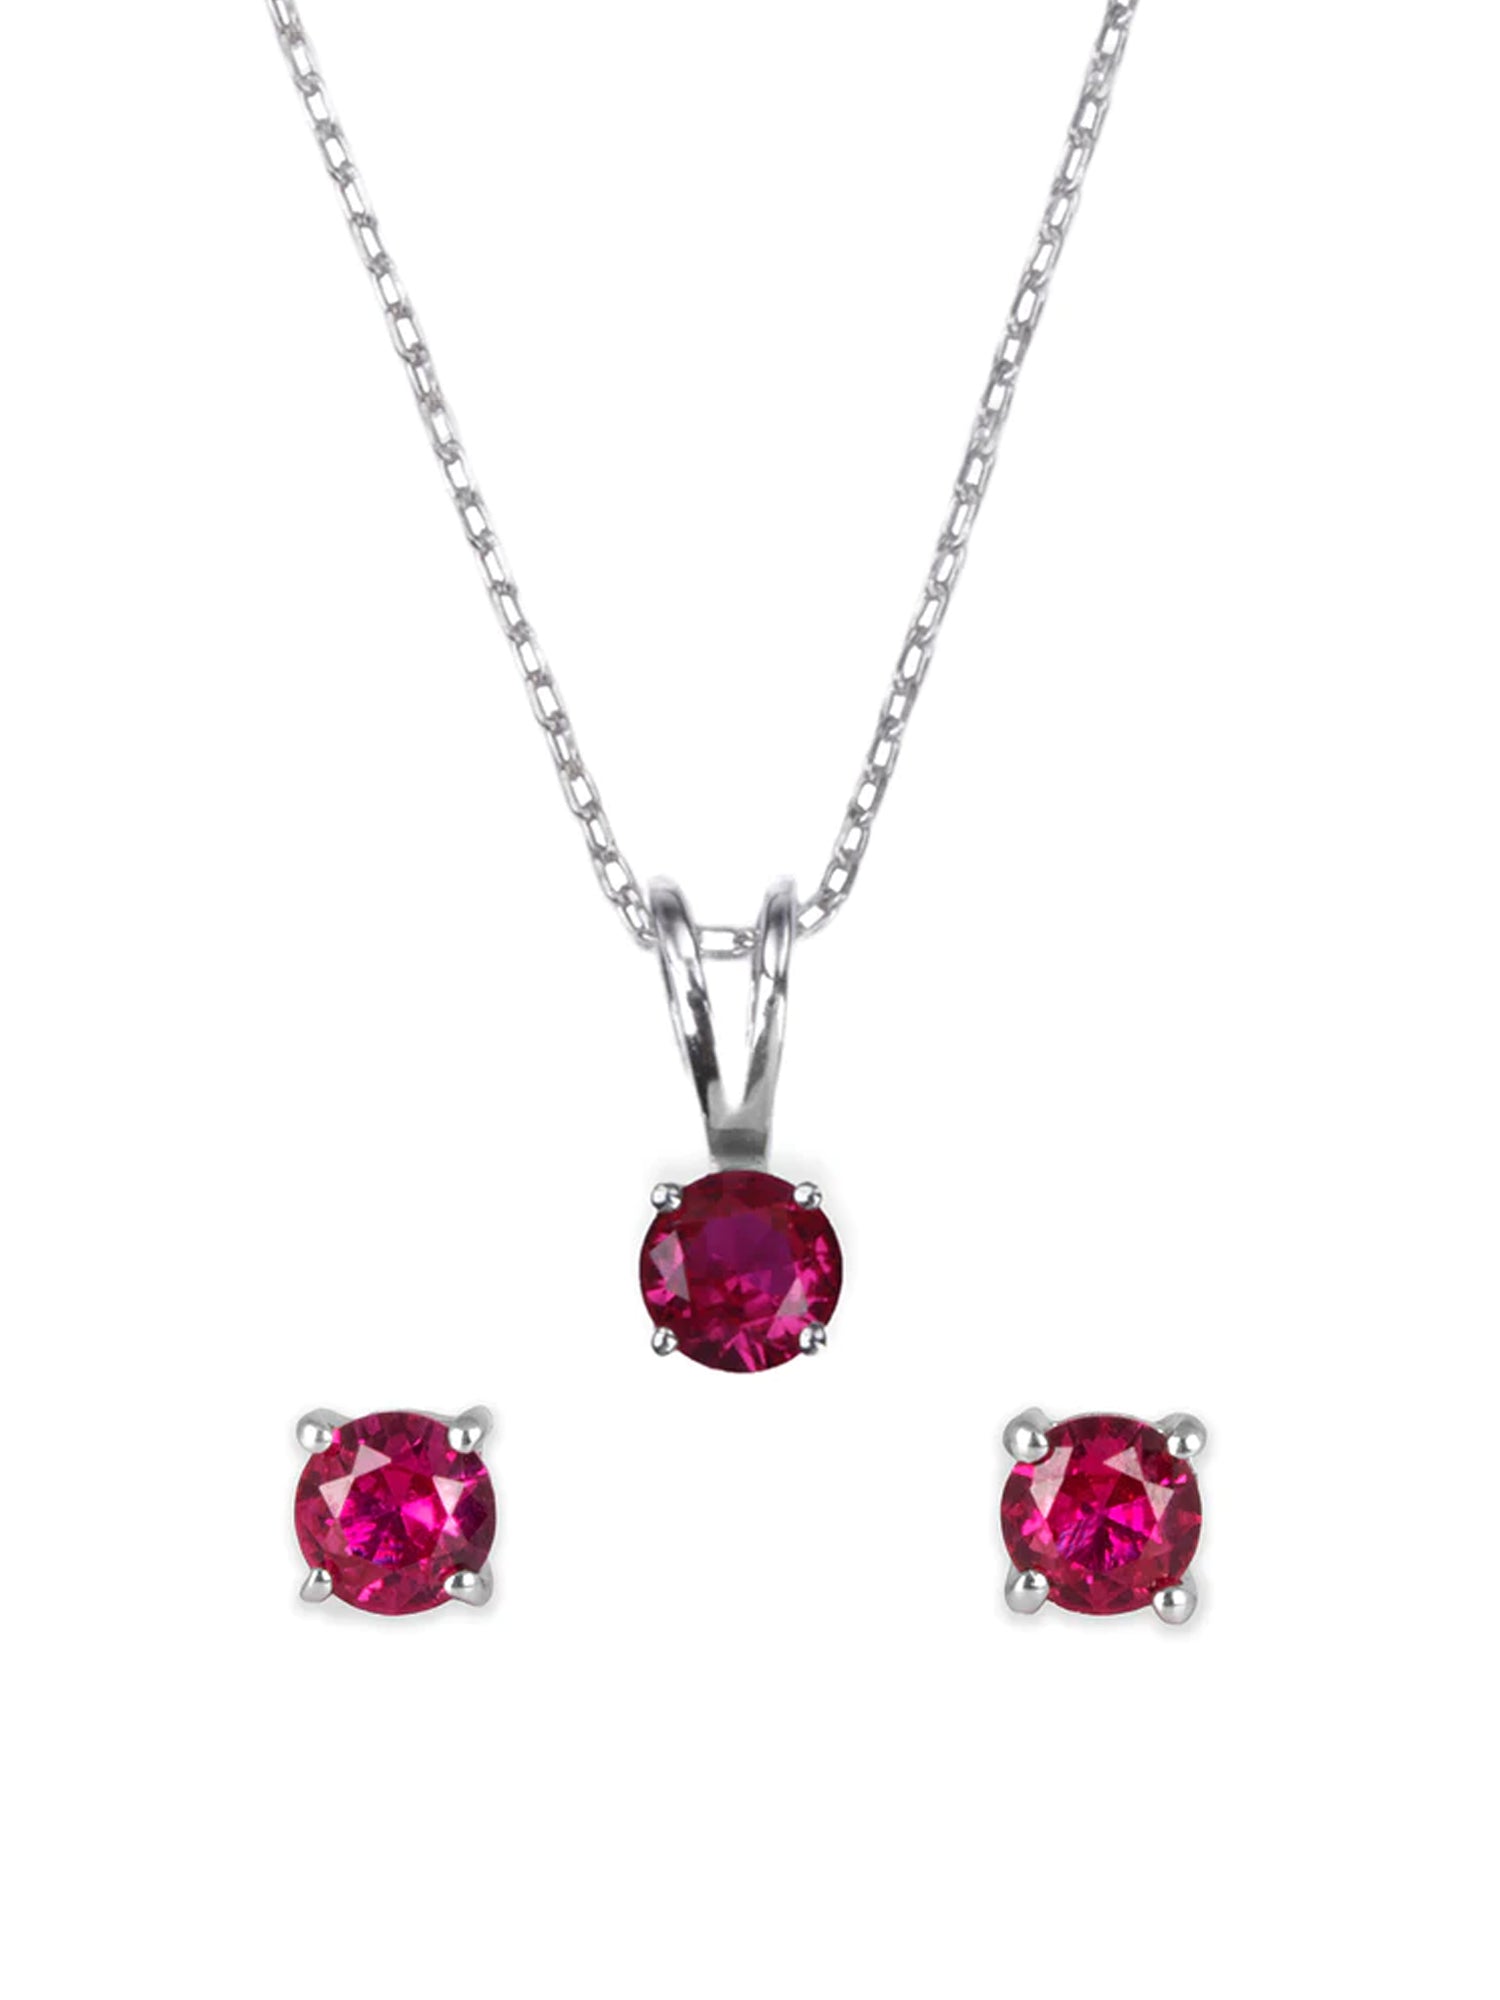 ORNATE JEWELS RUBY SOLITAIRE NECKLACE WITH EARRINGS-3